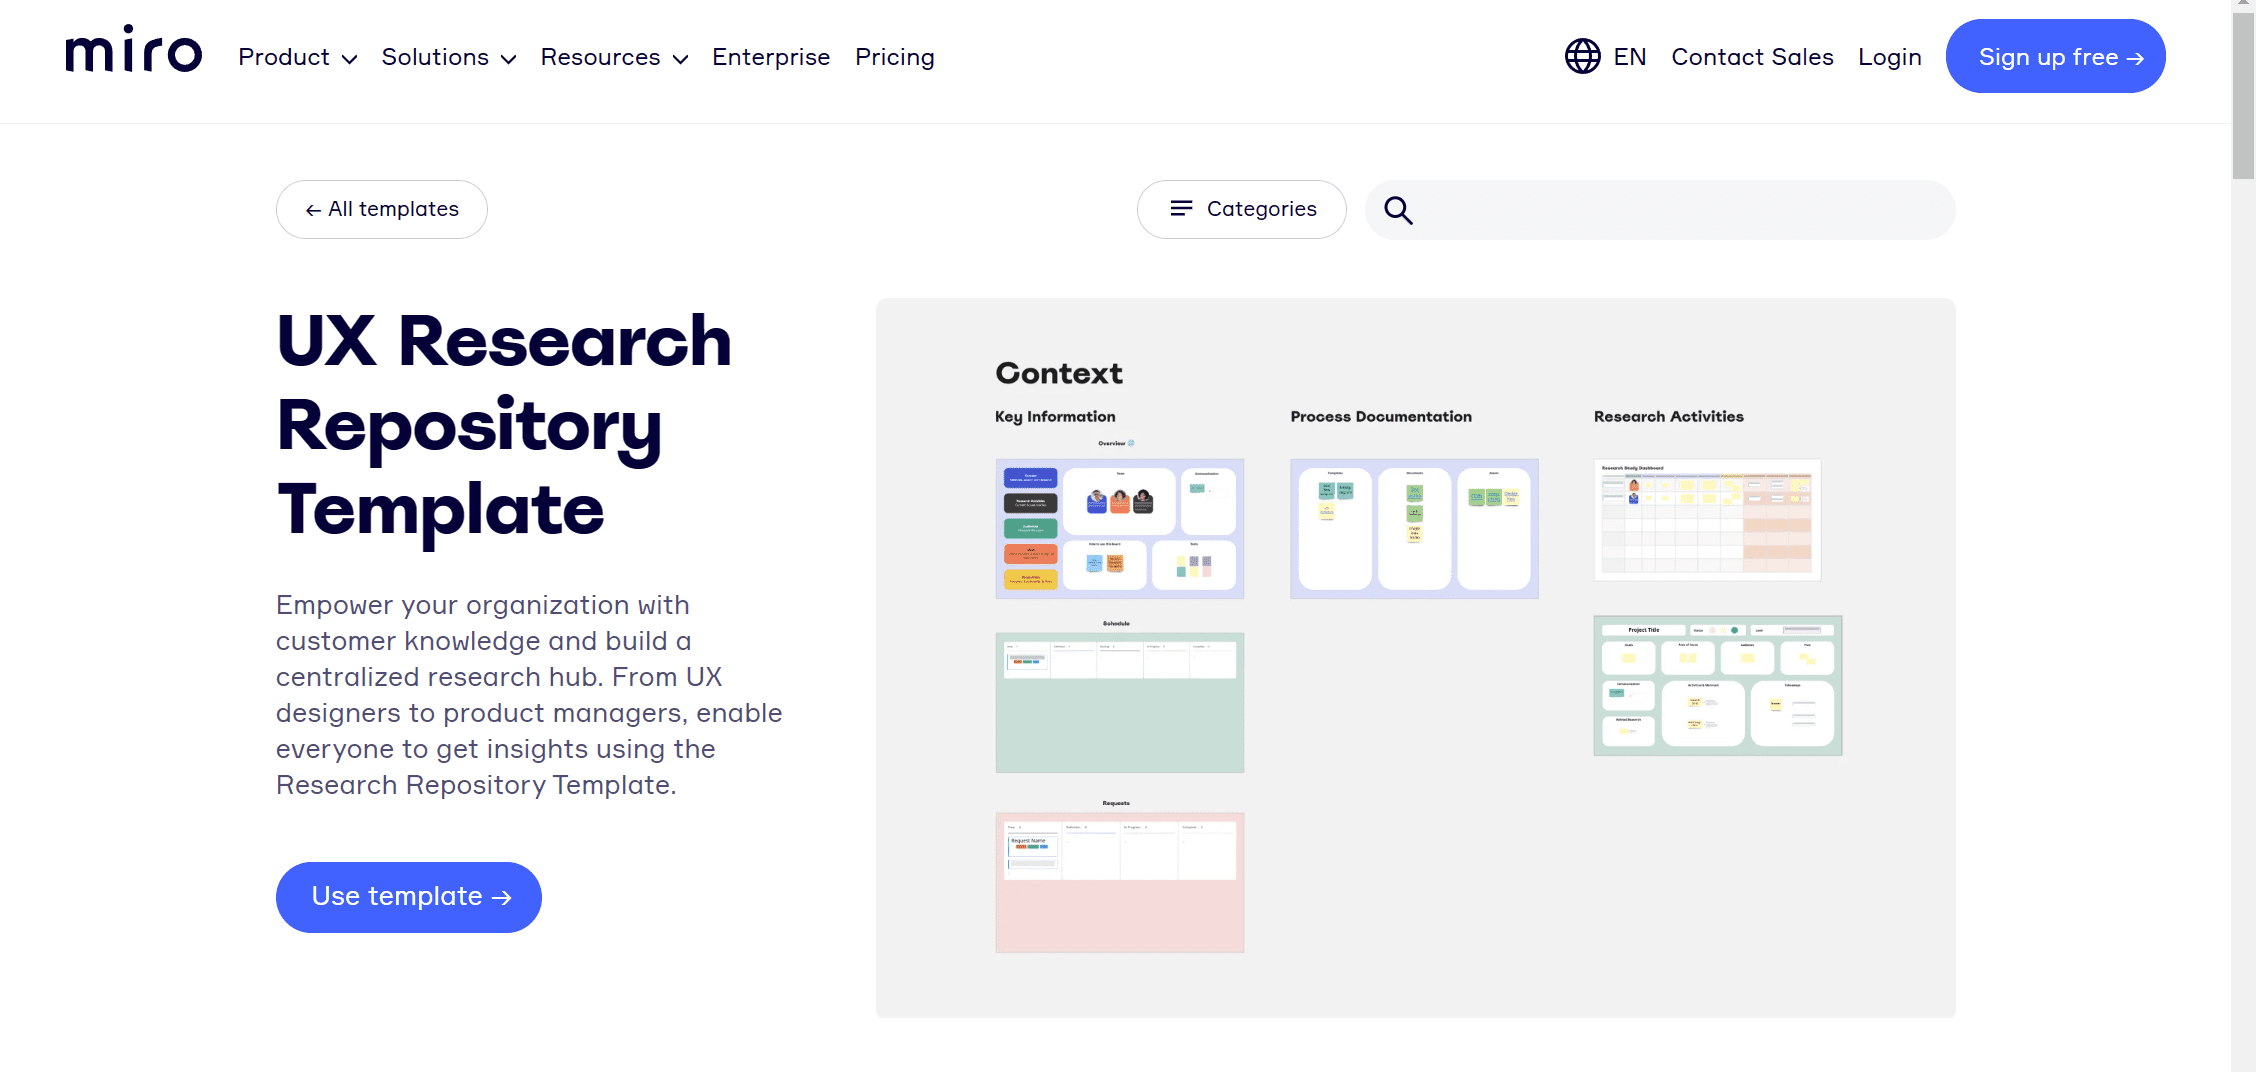 Miro now allows you to use templates to create a UX research repository